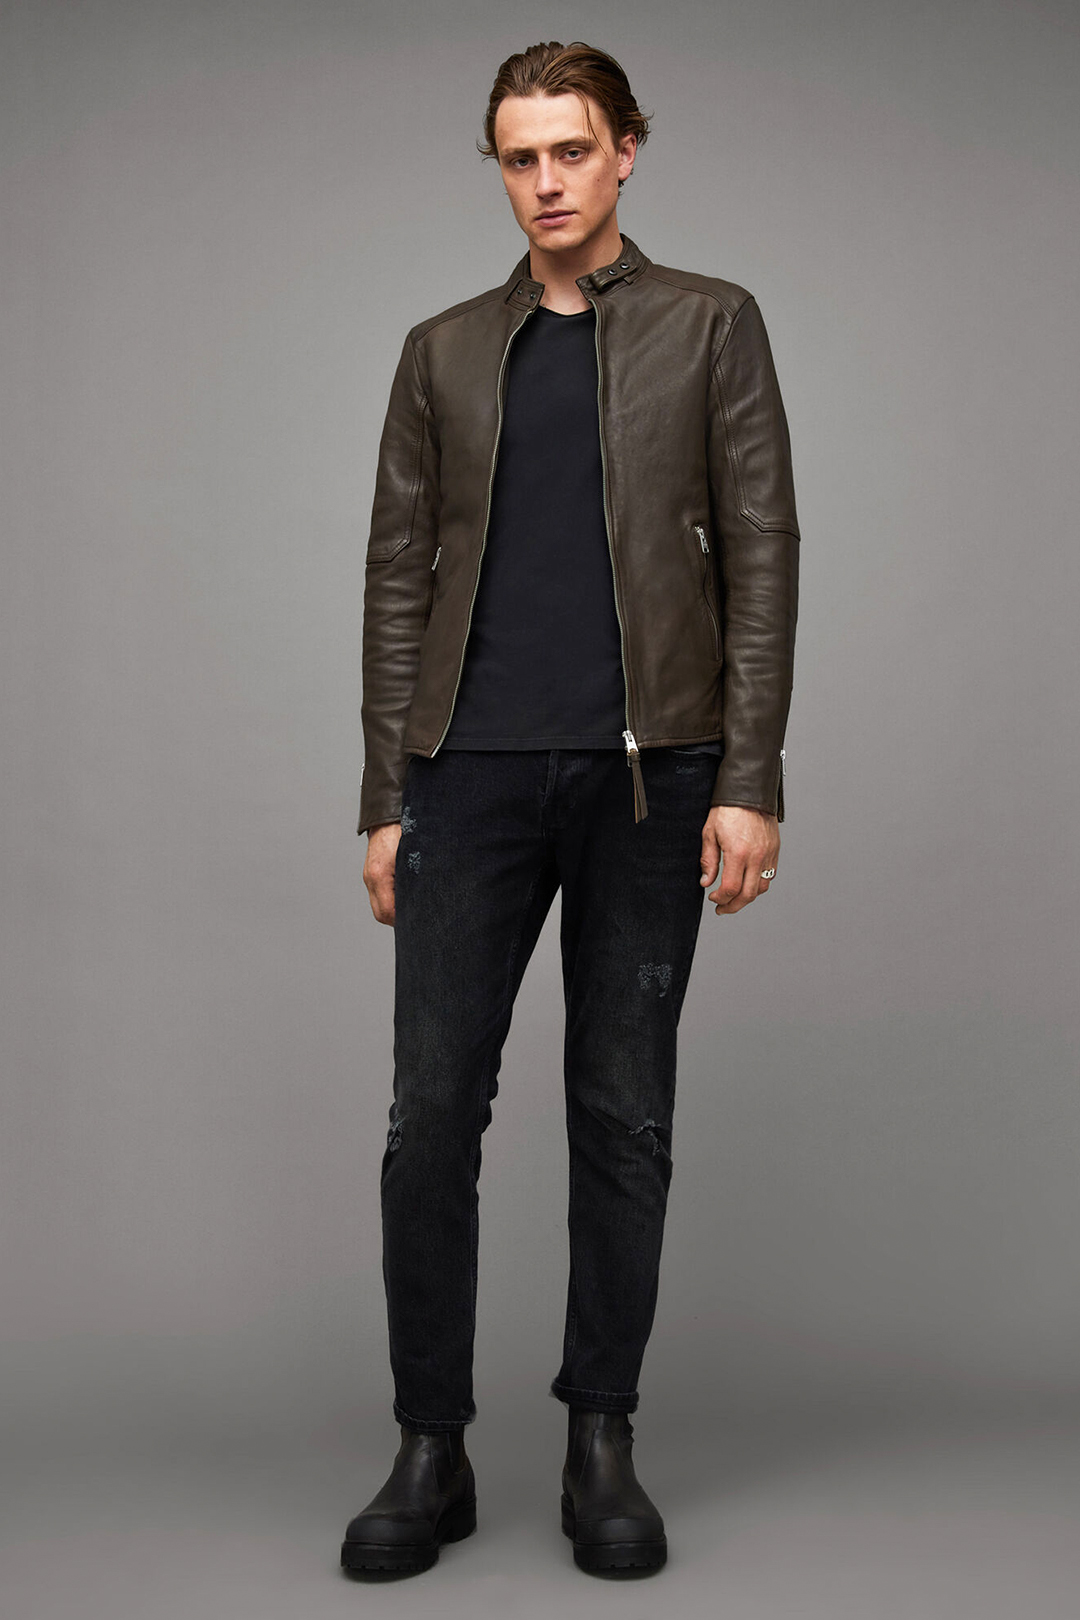 Cafe racer brown leather jacket, washed black t-shirt, black jeans and black leather Chelsea boots outfit